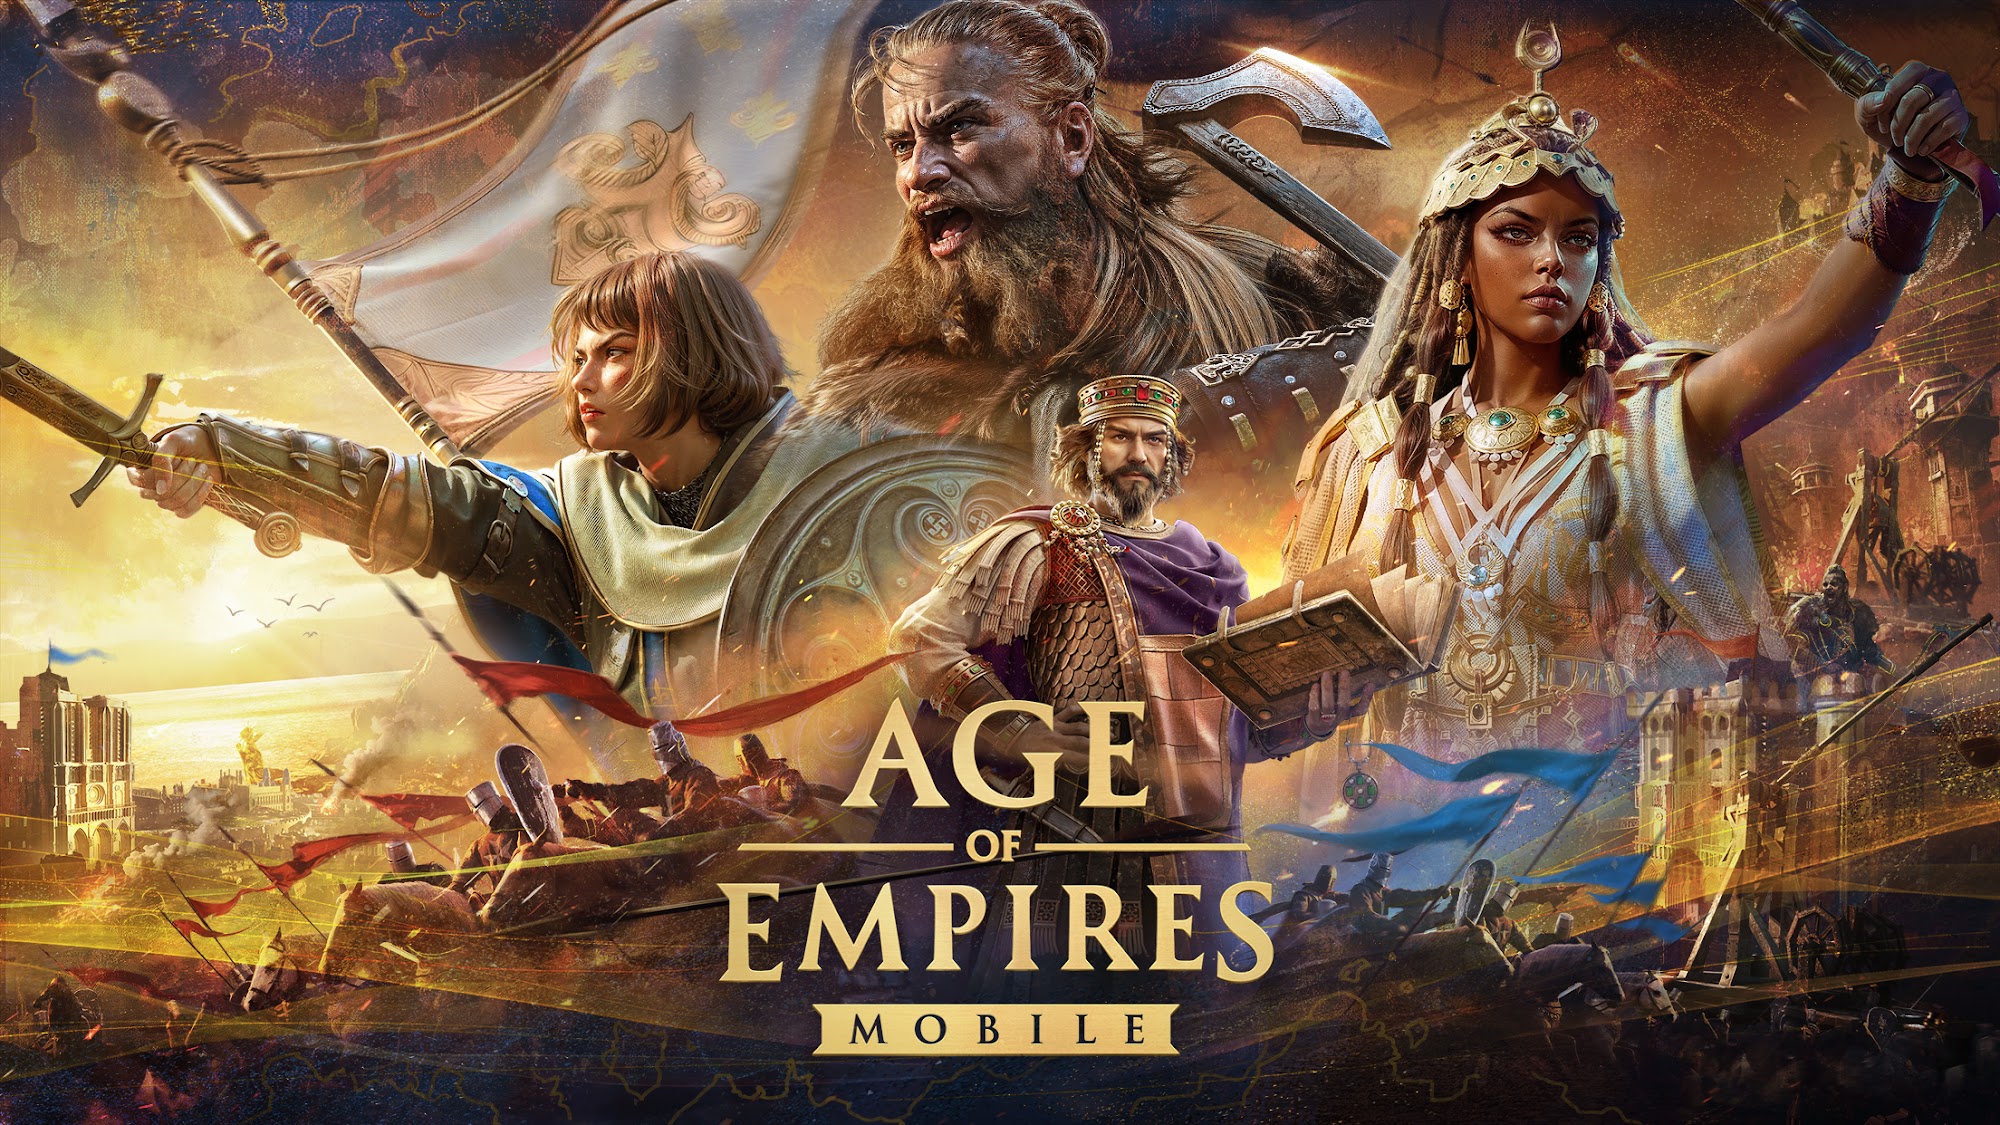 Full version of Android Historical game apk Age of Empires Mobile for tablet and phone.